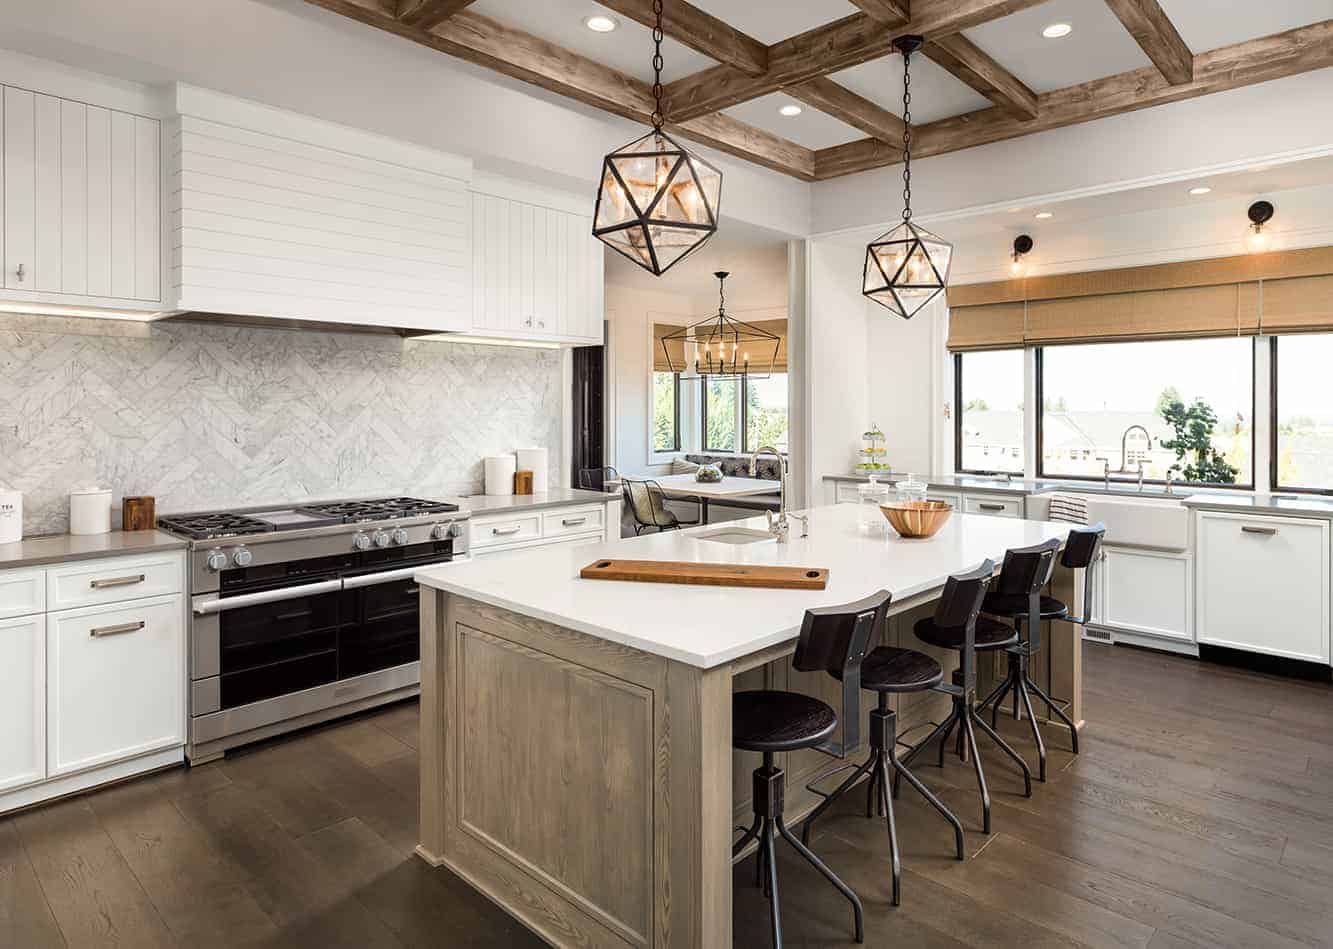 Luxury Kitchen with white cabinets, white counter tops, and a large island with a wood base